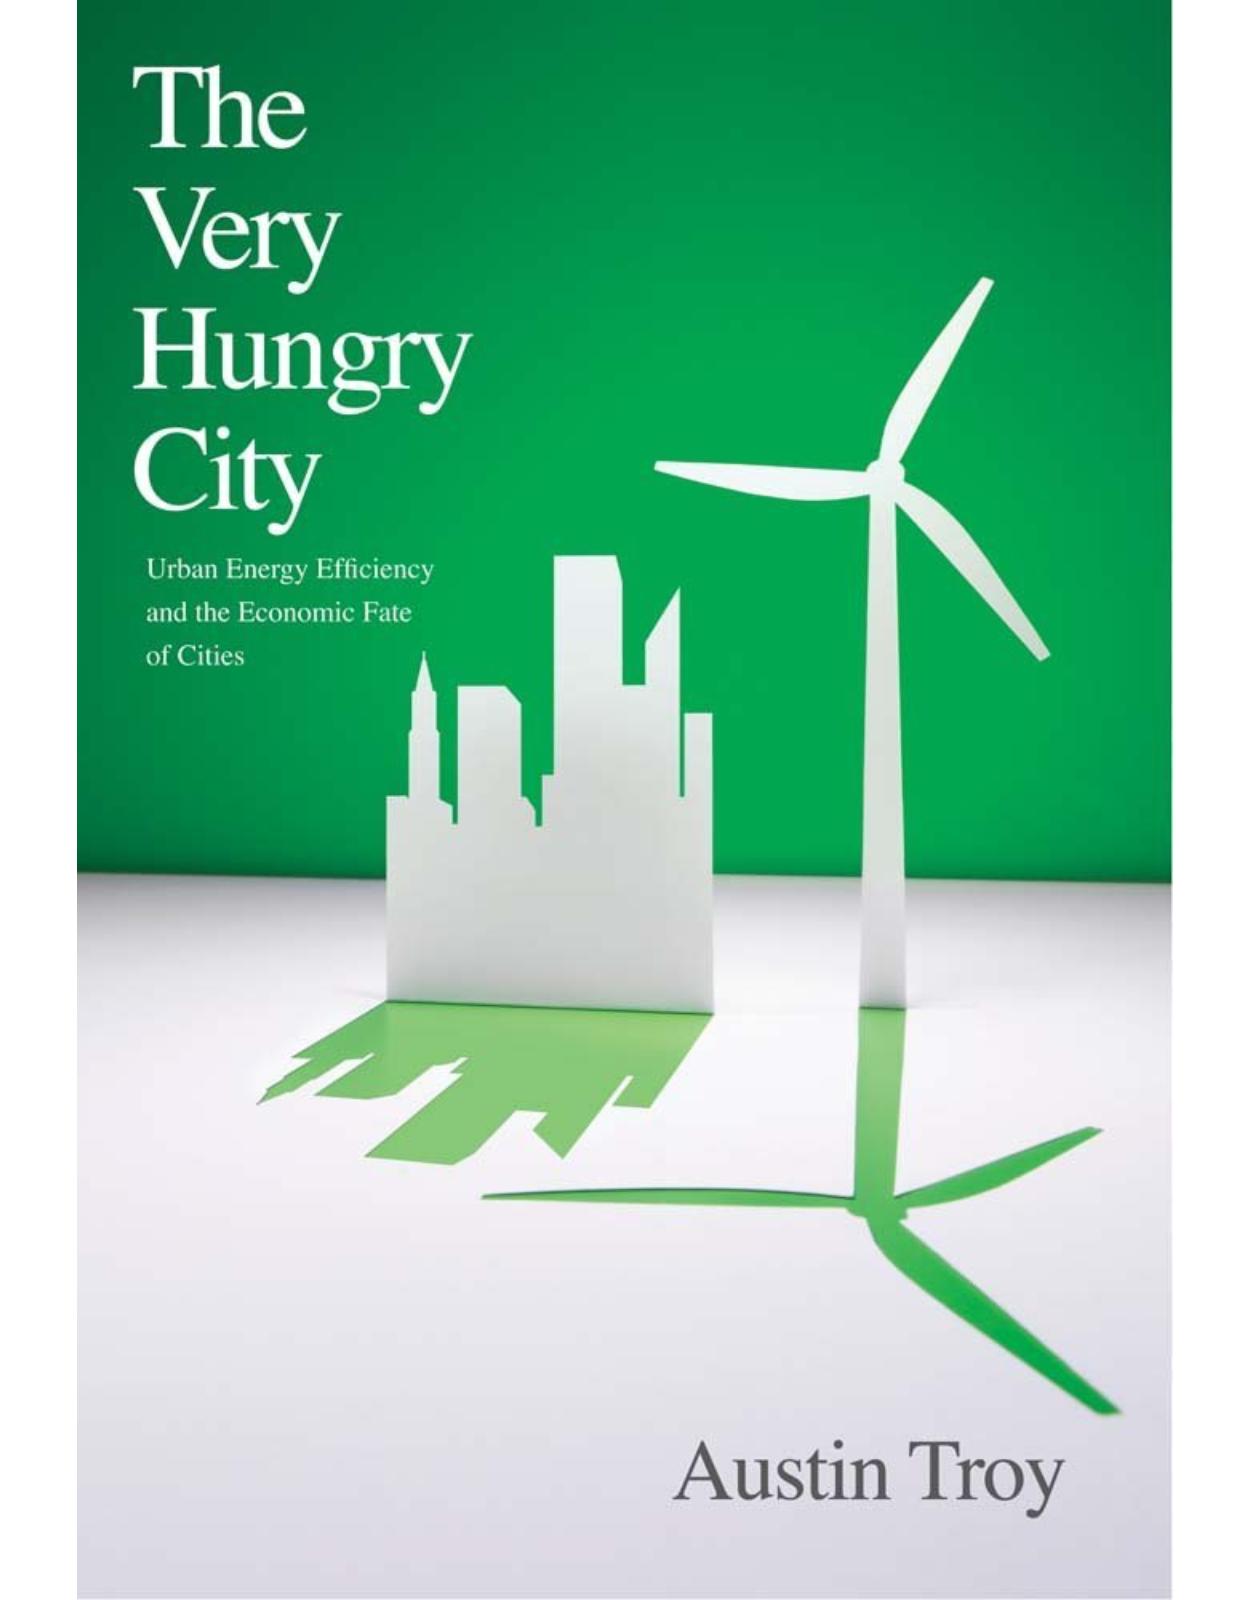 Very Hungry City. Urban Energy Efficiency and the Economic Fate of Cities